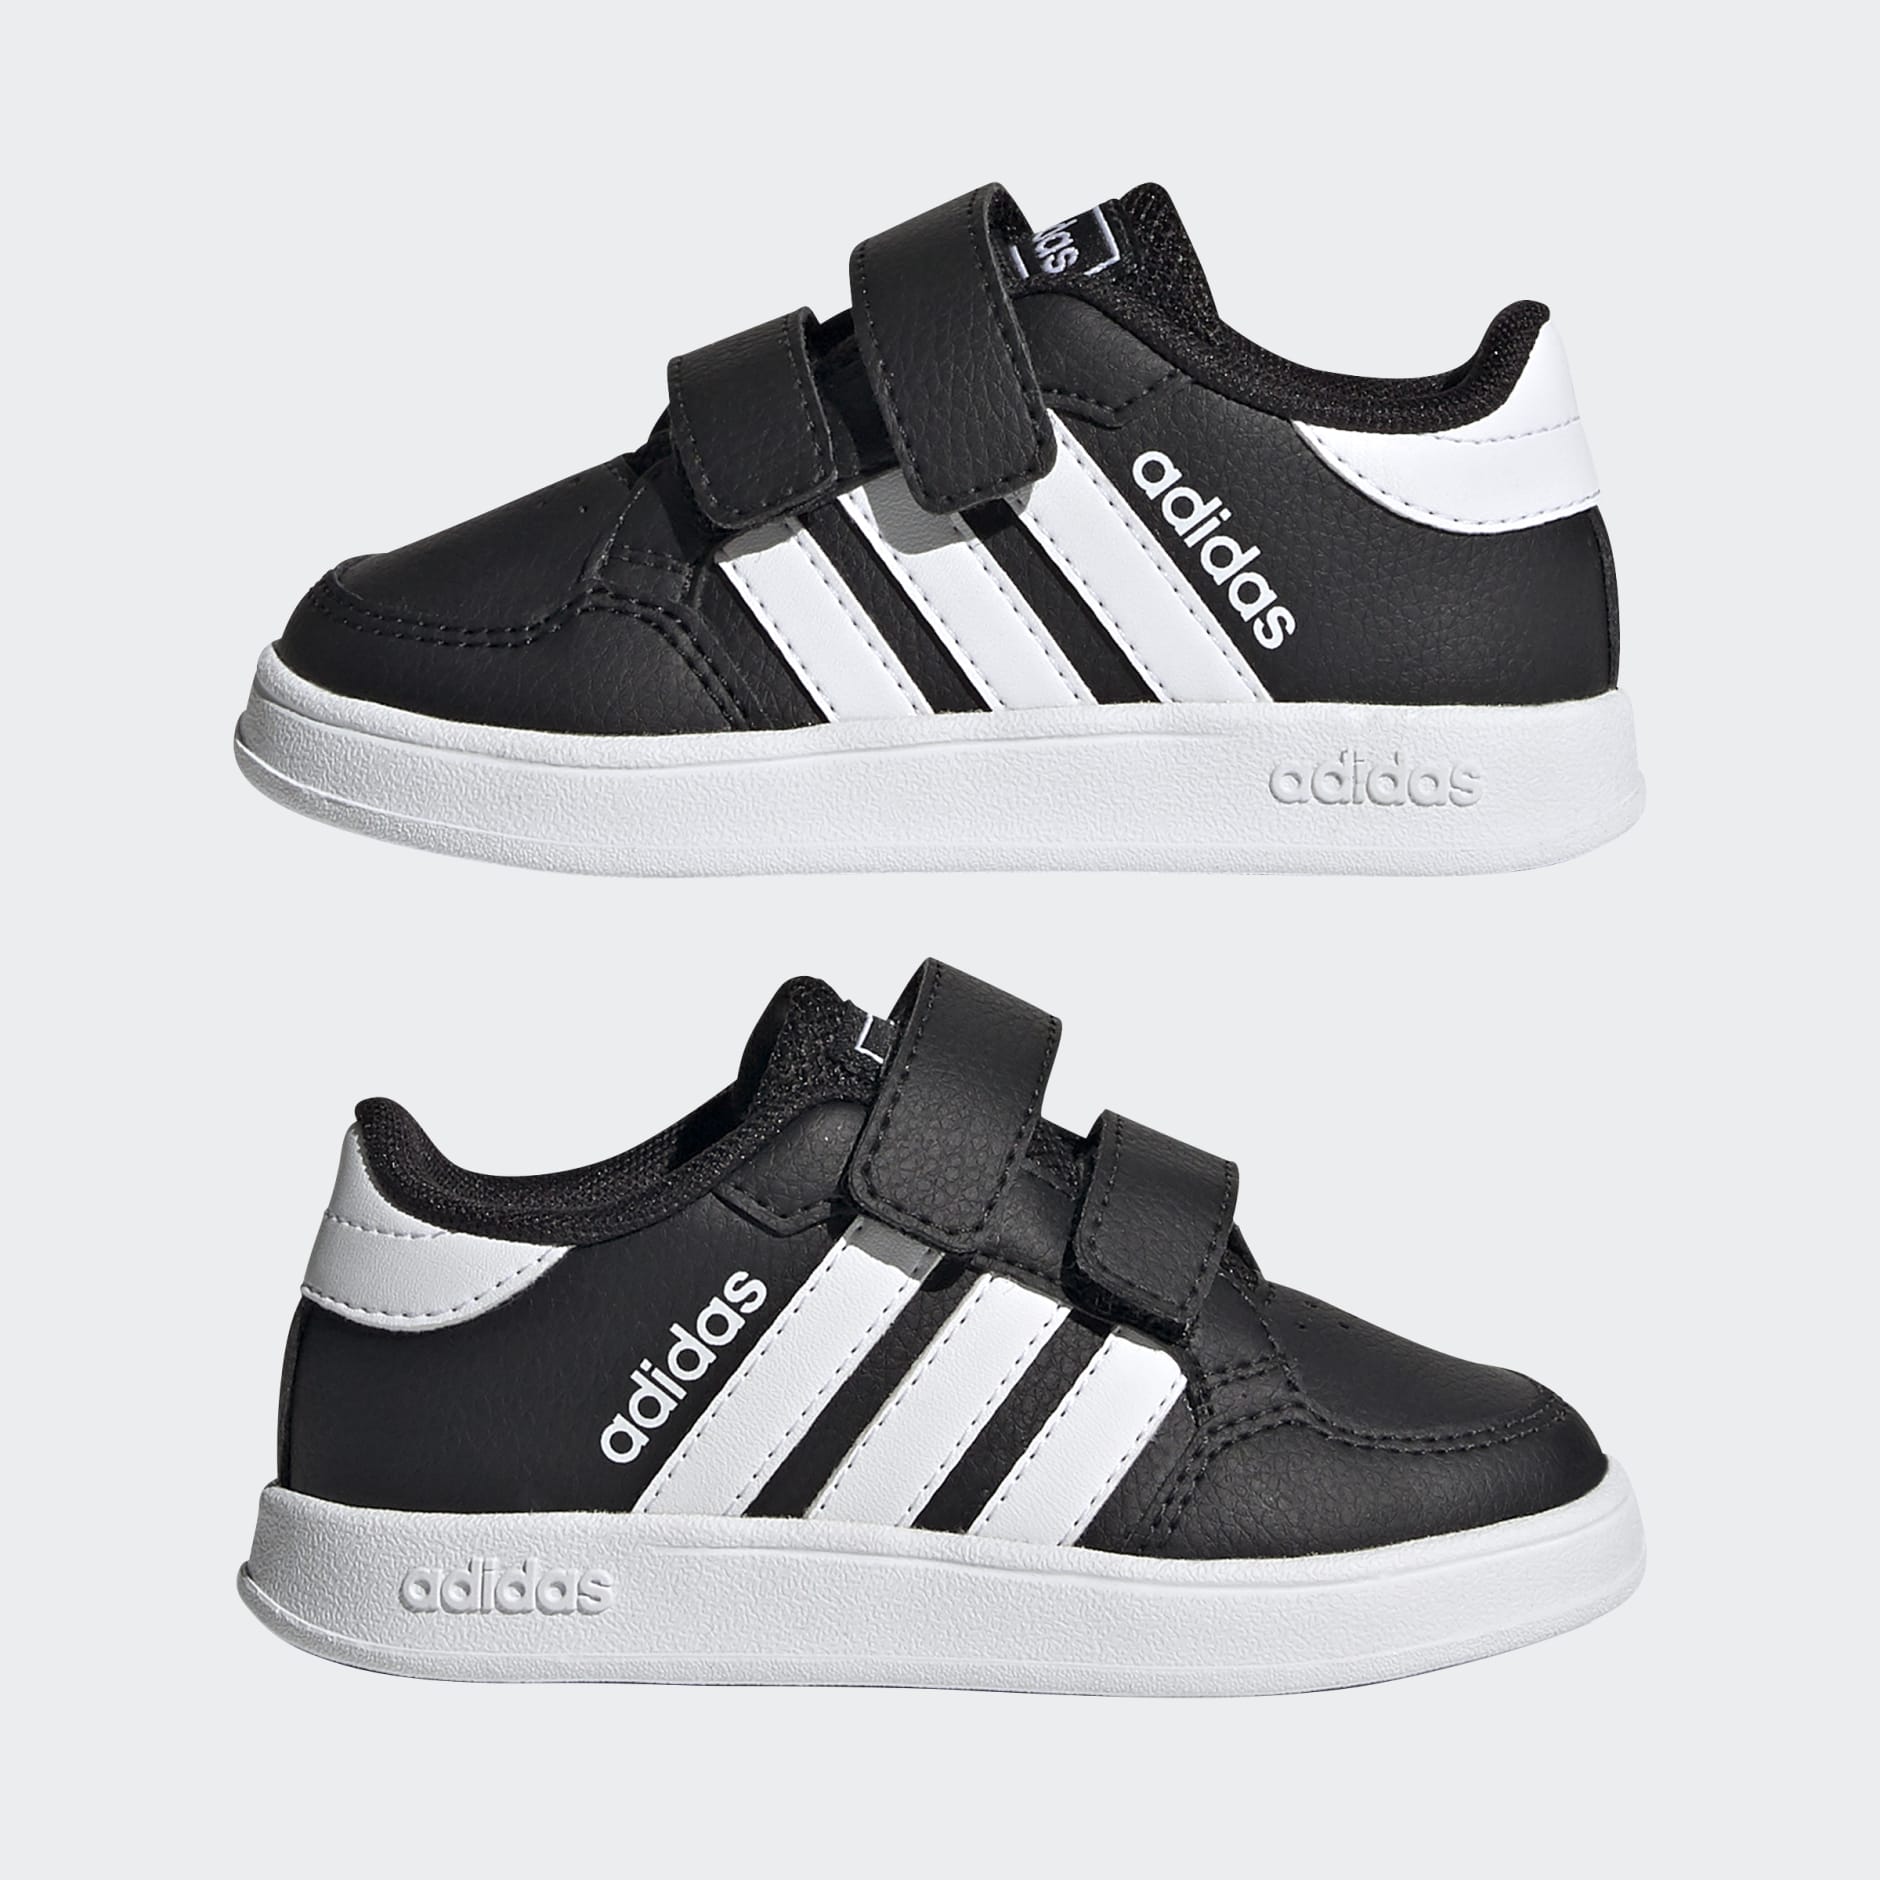 Shoes - Breaknet Shoes - Black | adidas South Africa